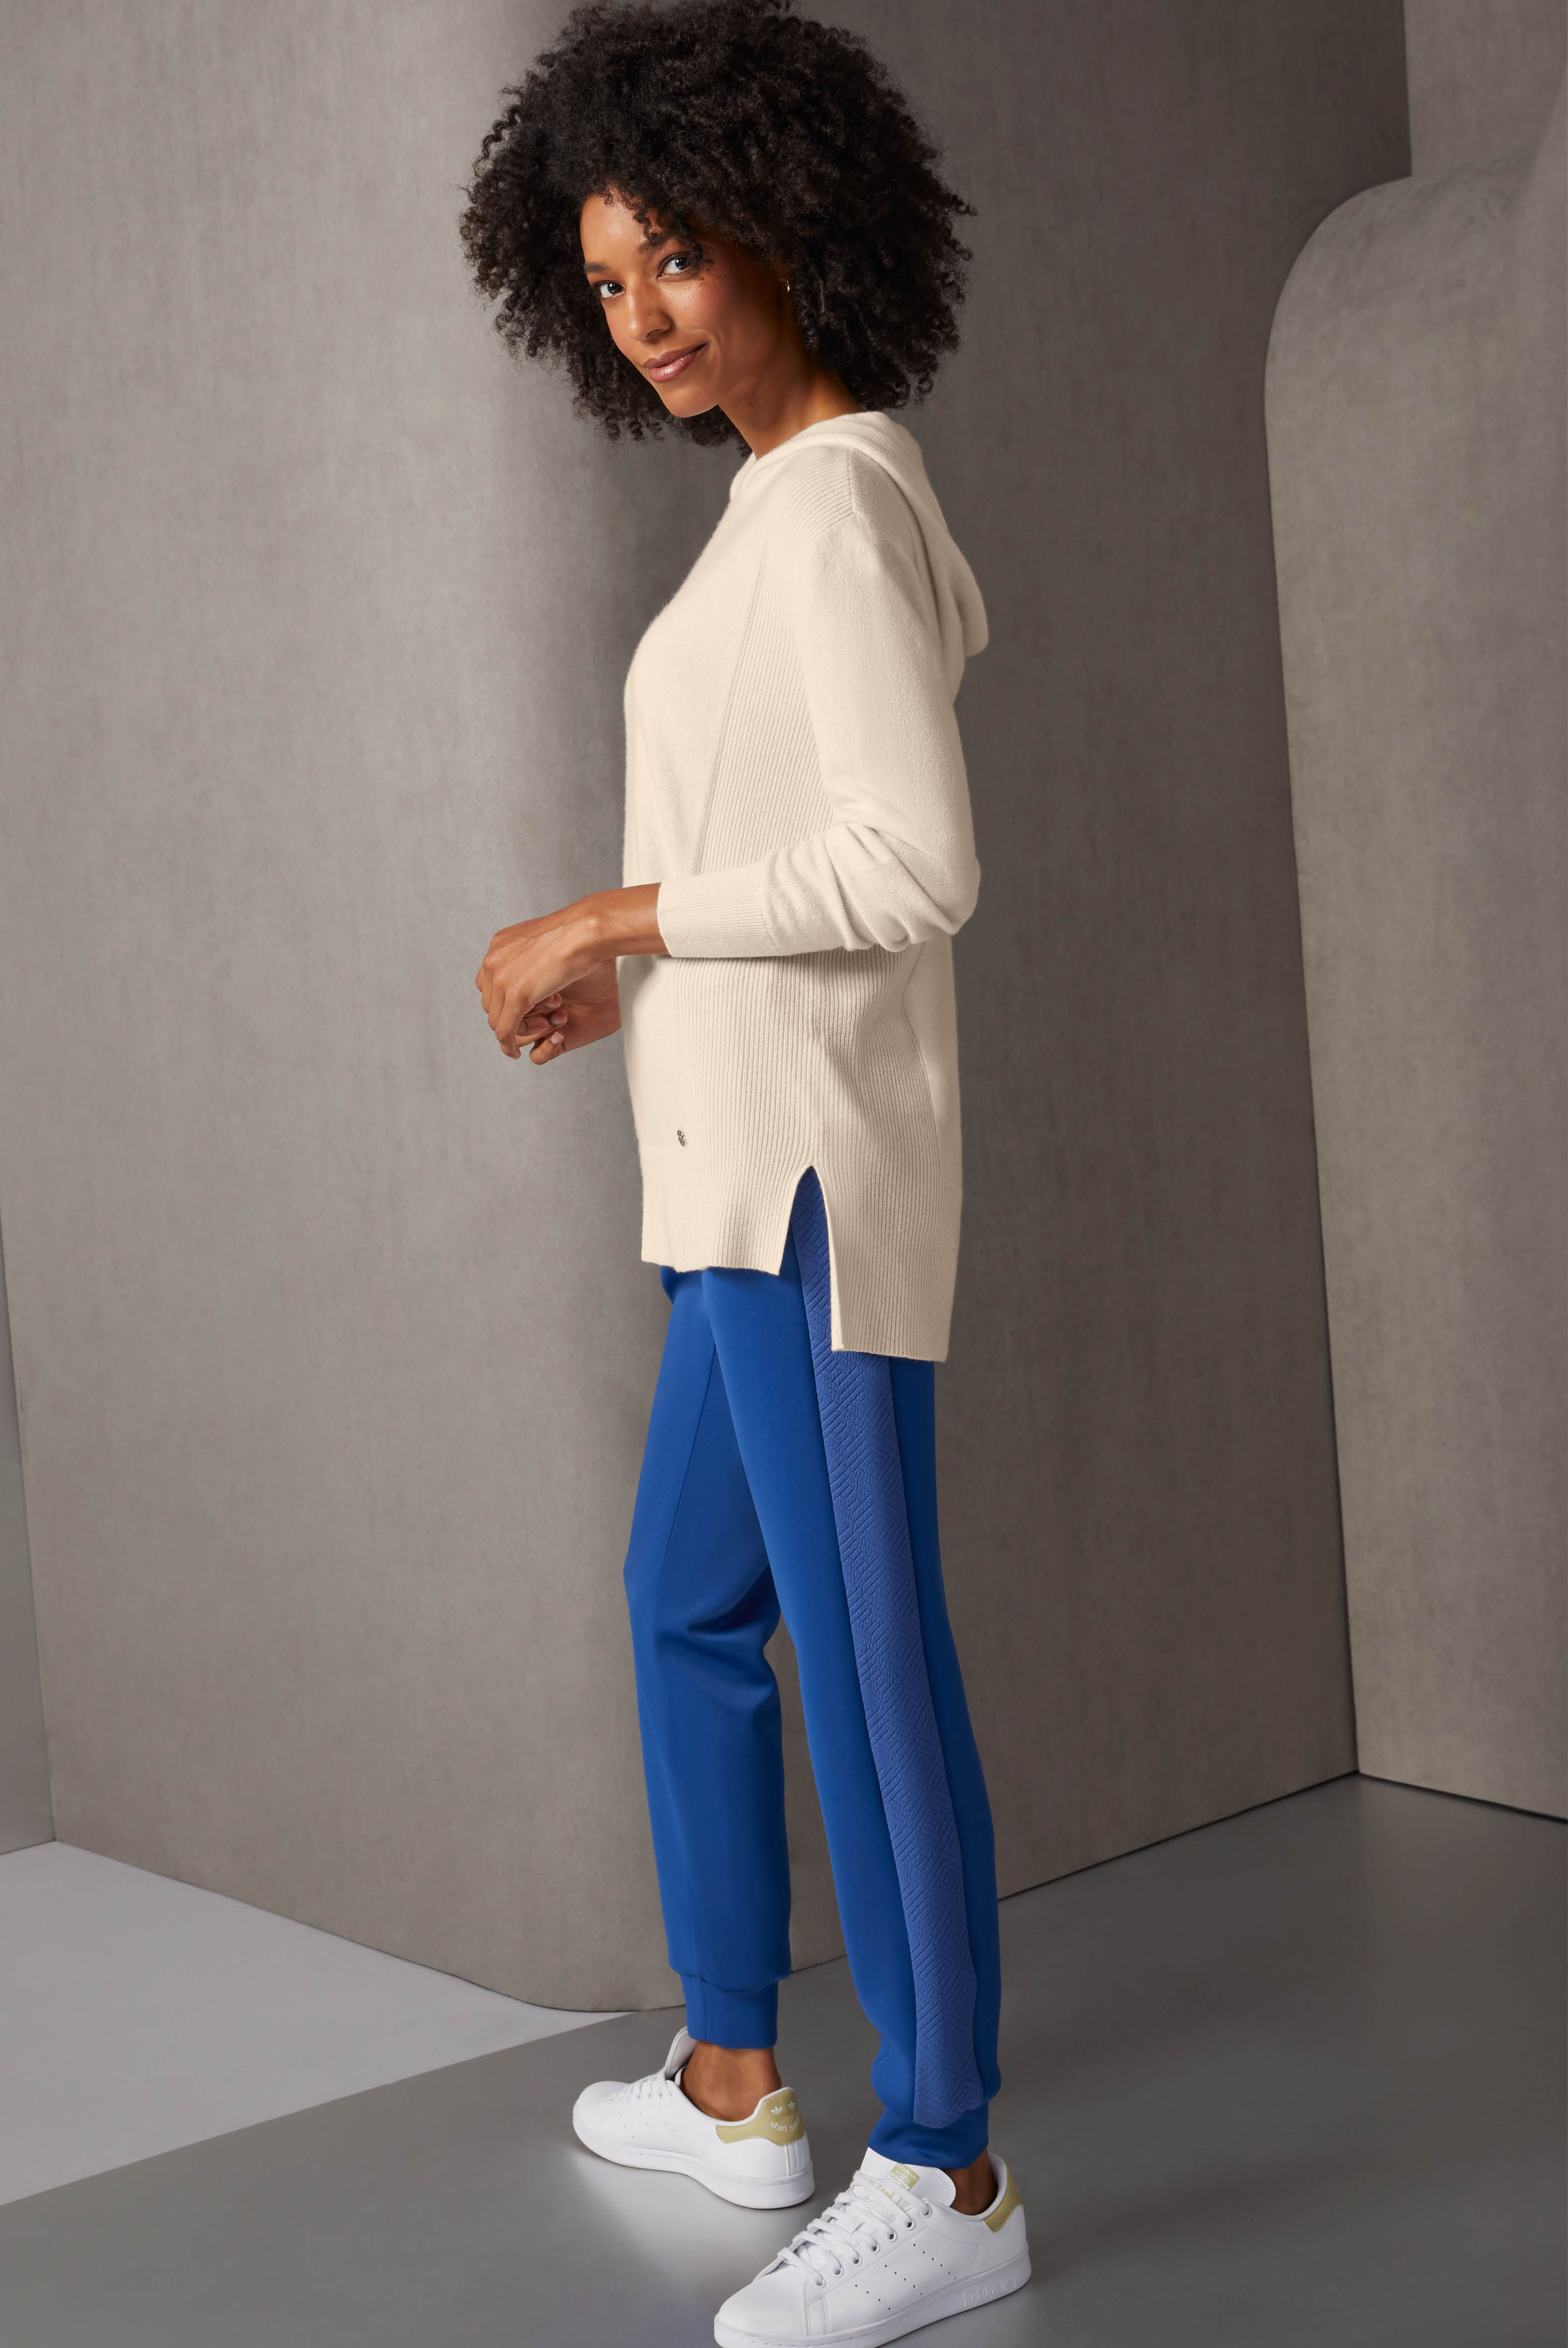 Contrast textures enrich this hoodie and jogger ensemble in creamy tapioca and bright nouvean navy. The high-low jersey hoodie is pure cashmere, with rib-knit accents at the sides, cuffs, and slit hem. 